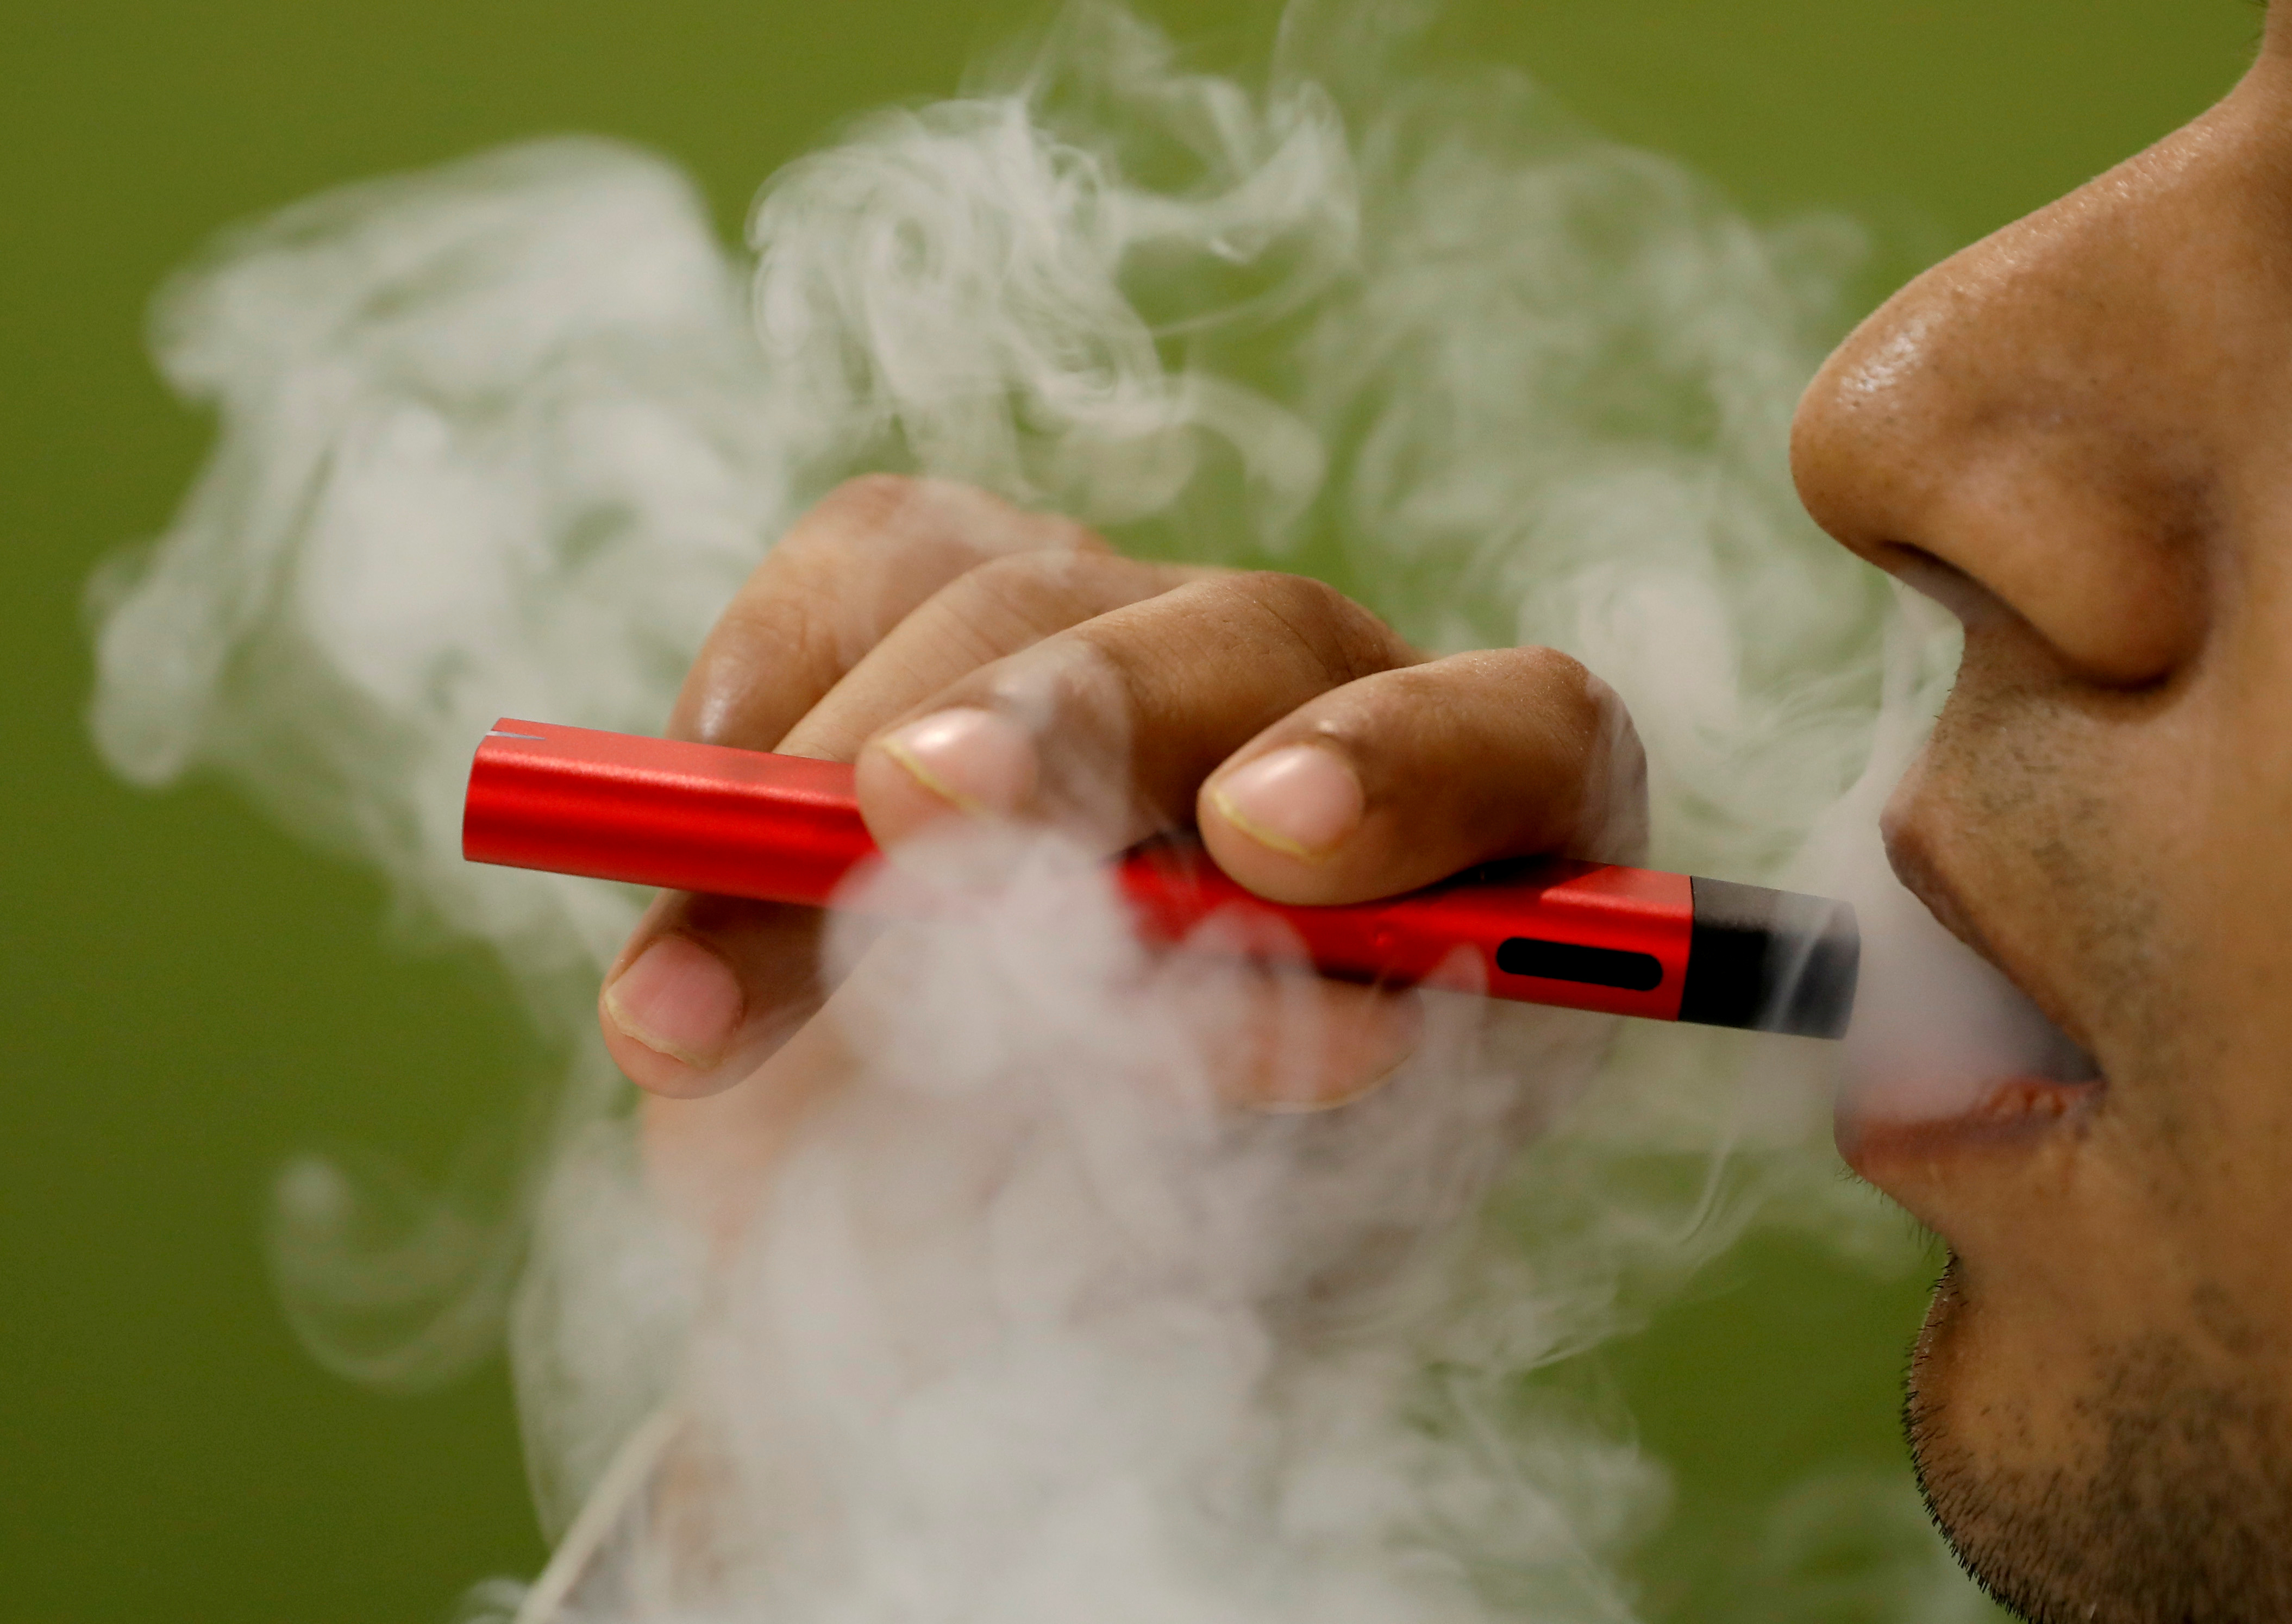 FILE PHOTO: A man uses a vape device in this illustration picture